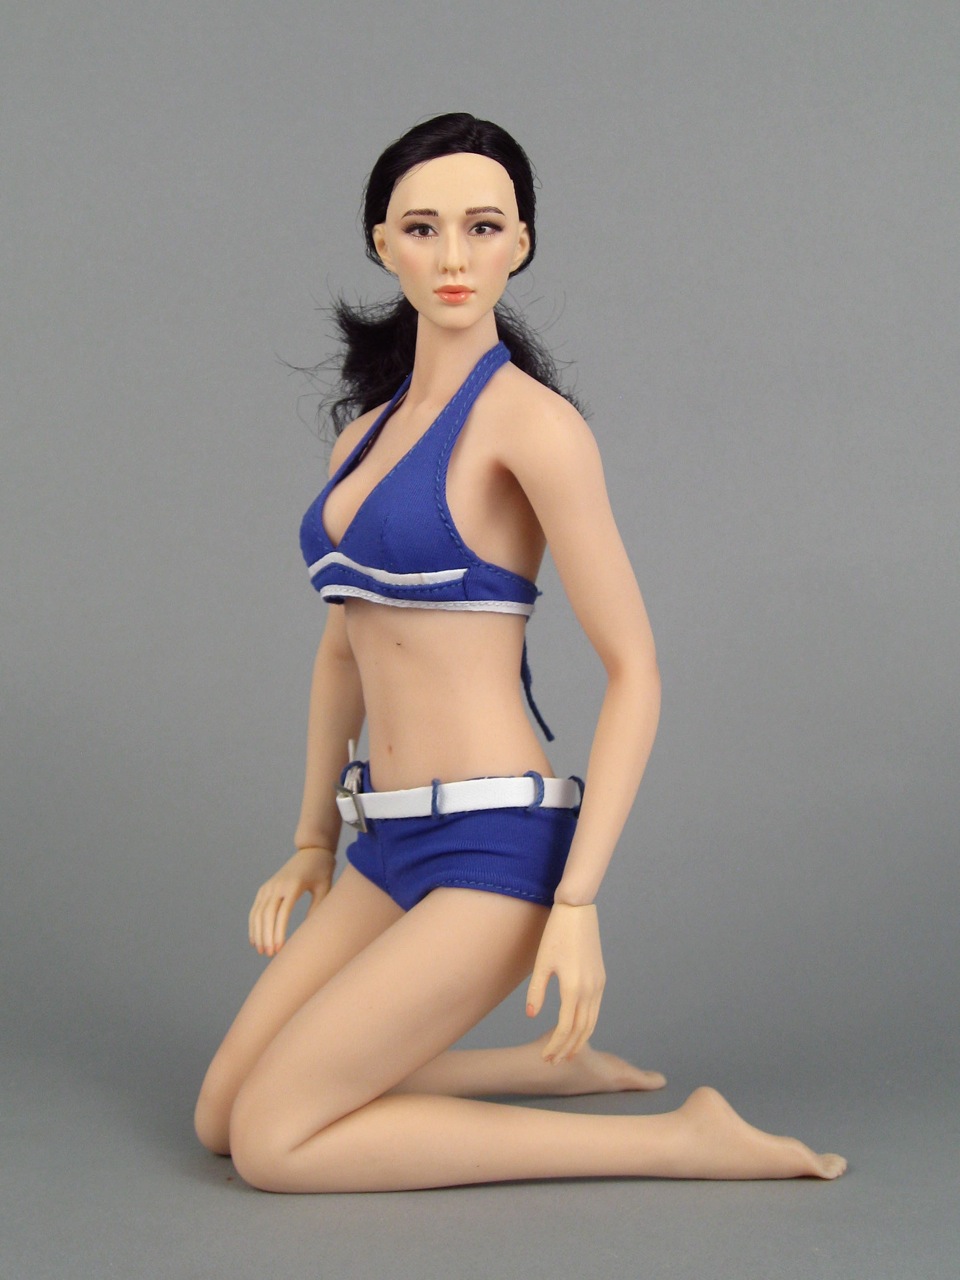 Phicen's Super Flexible Seamless 1:6 Scale Figure with a Stainless